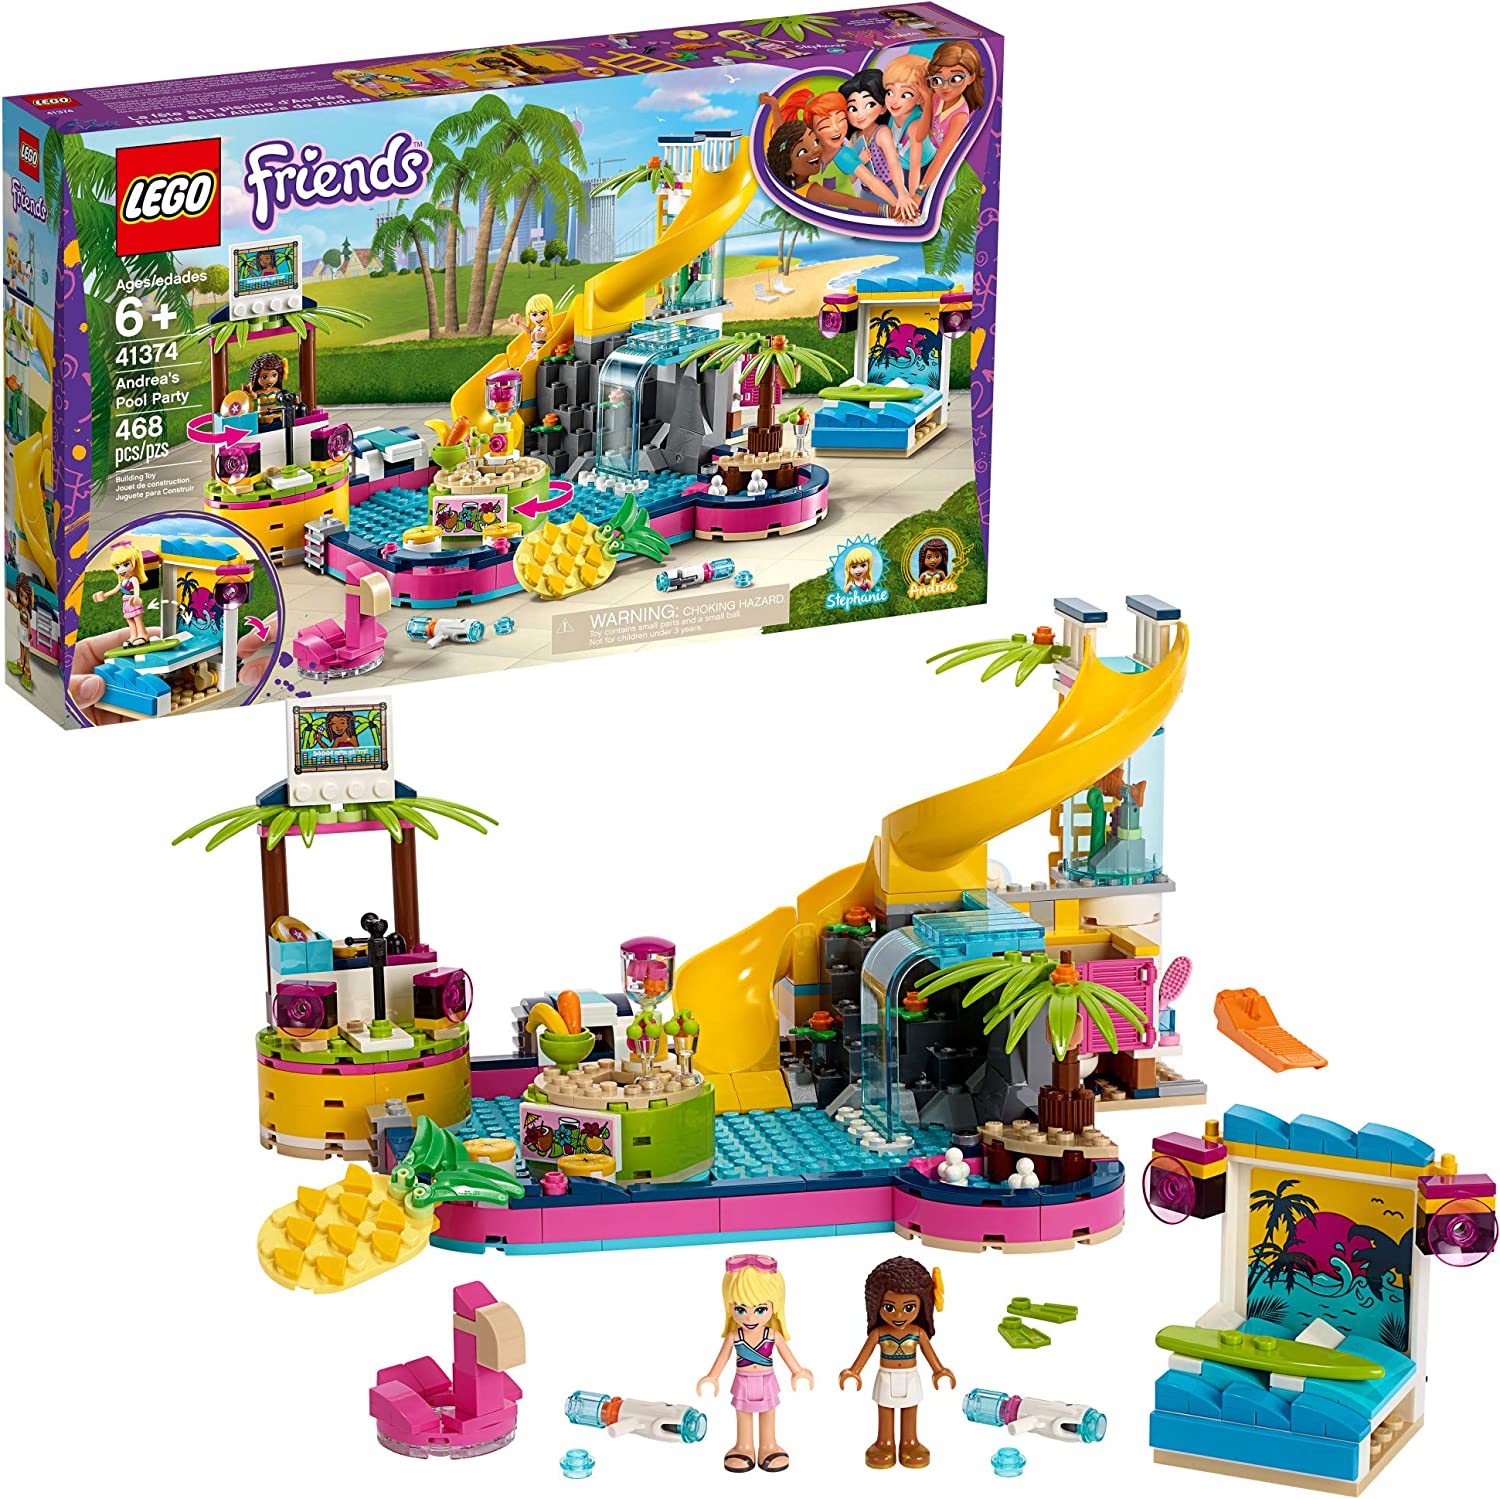 Andrea's Pool Party - LEGO Friends Set (41374) [RETIRED]